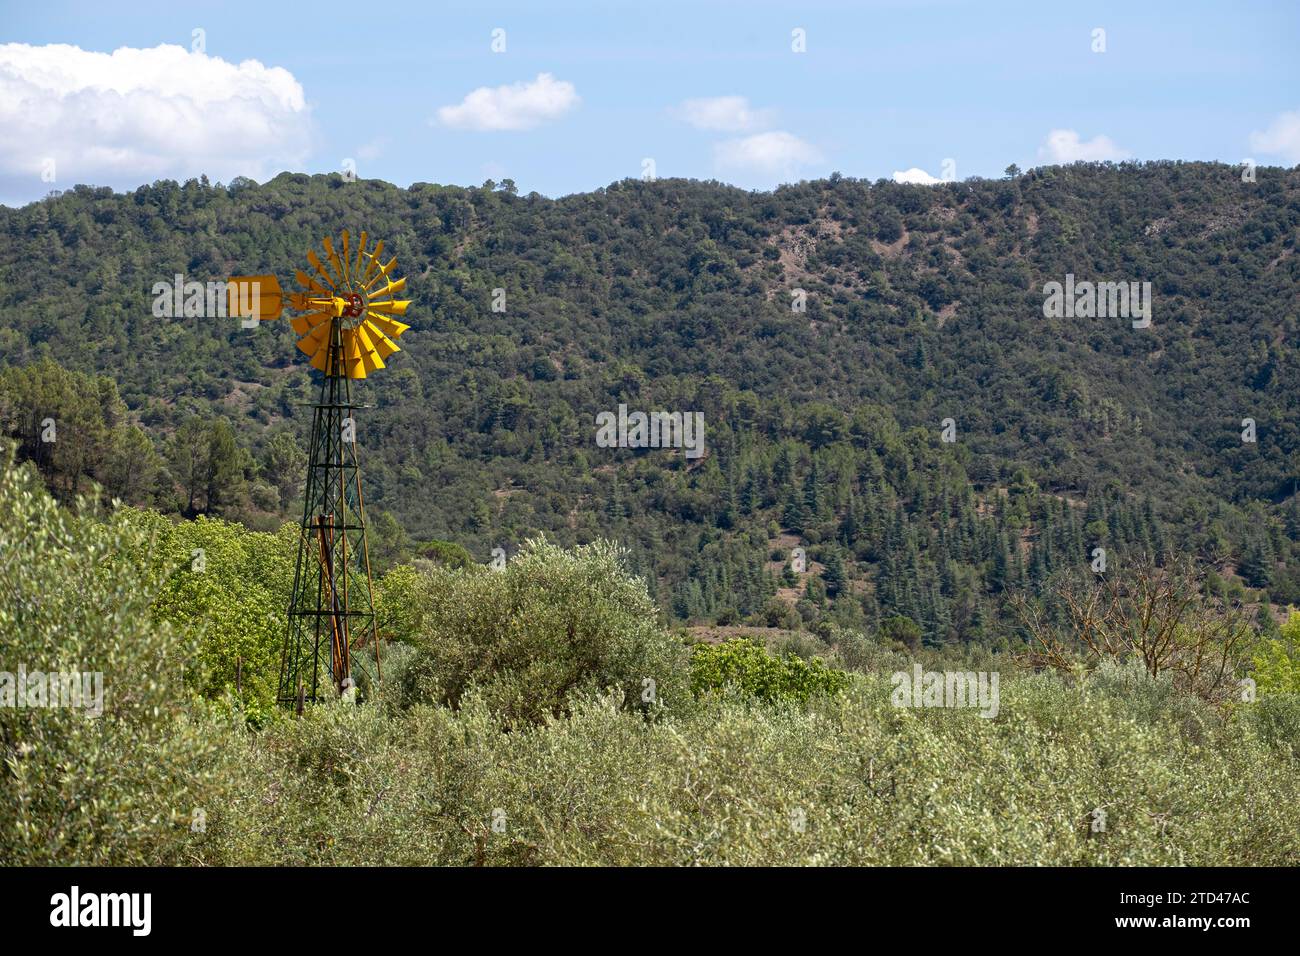 Windmill to produce electricity on a farm in the agricultural fields of Spain Stock Photo